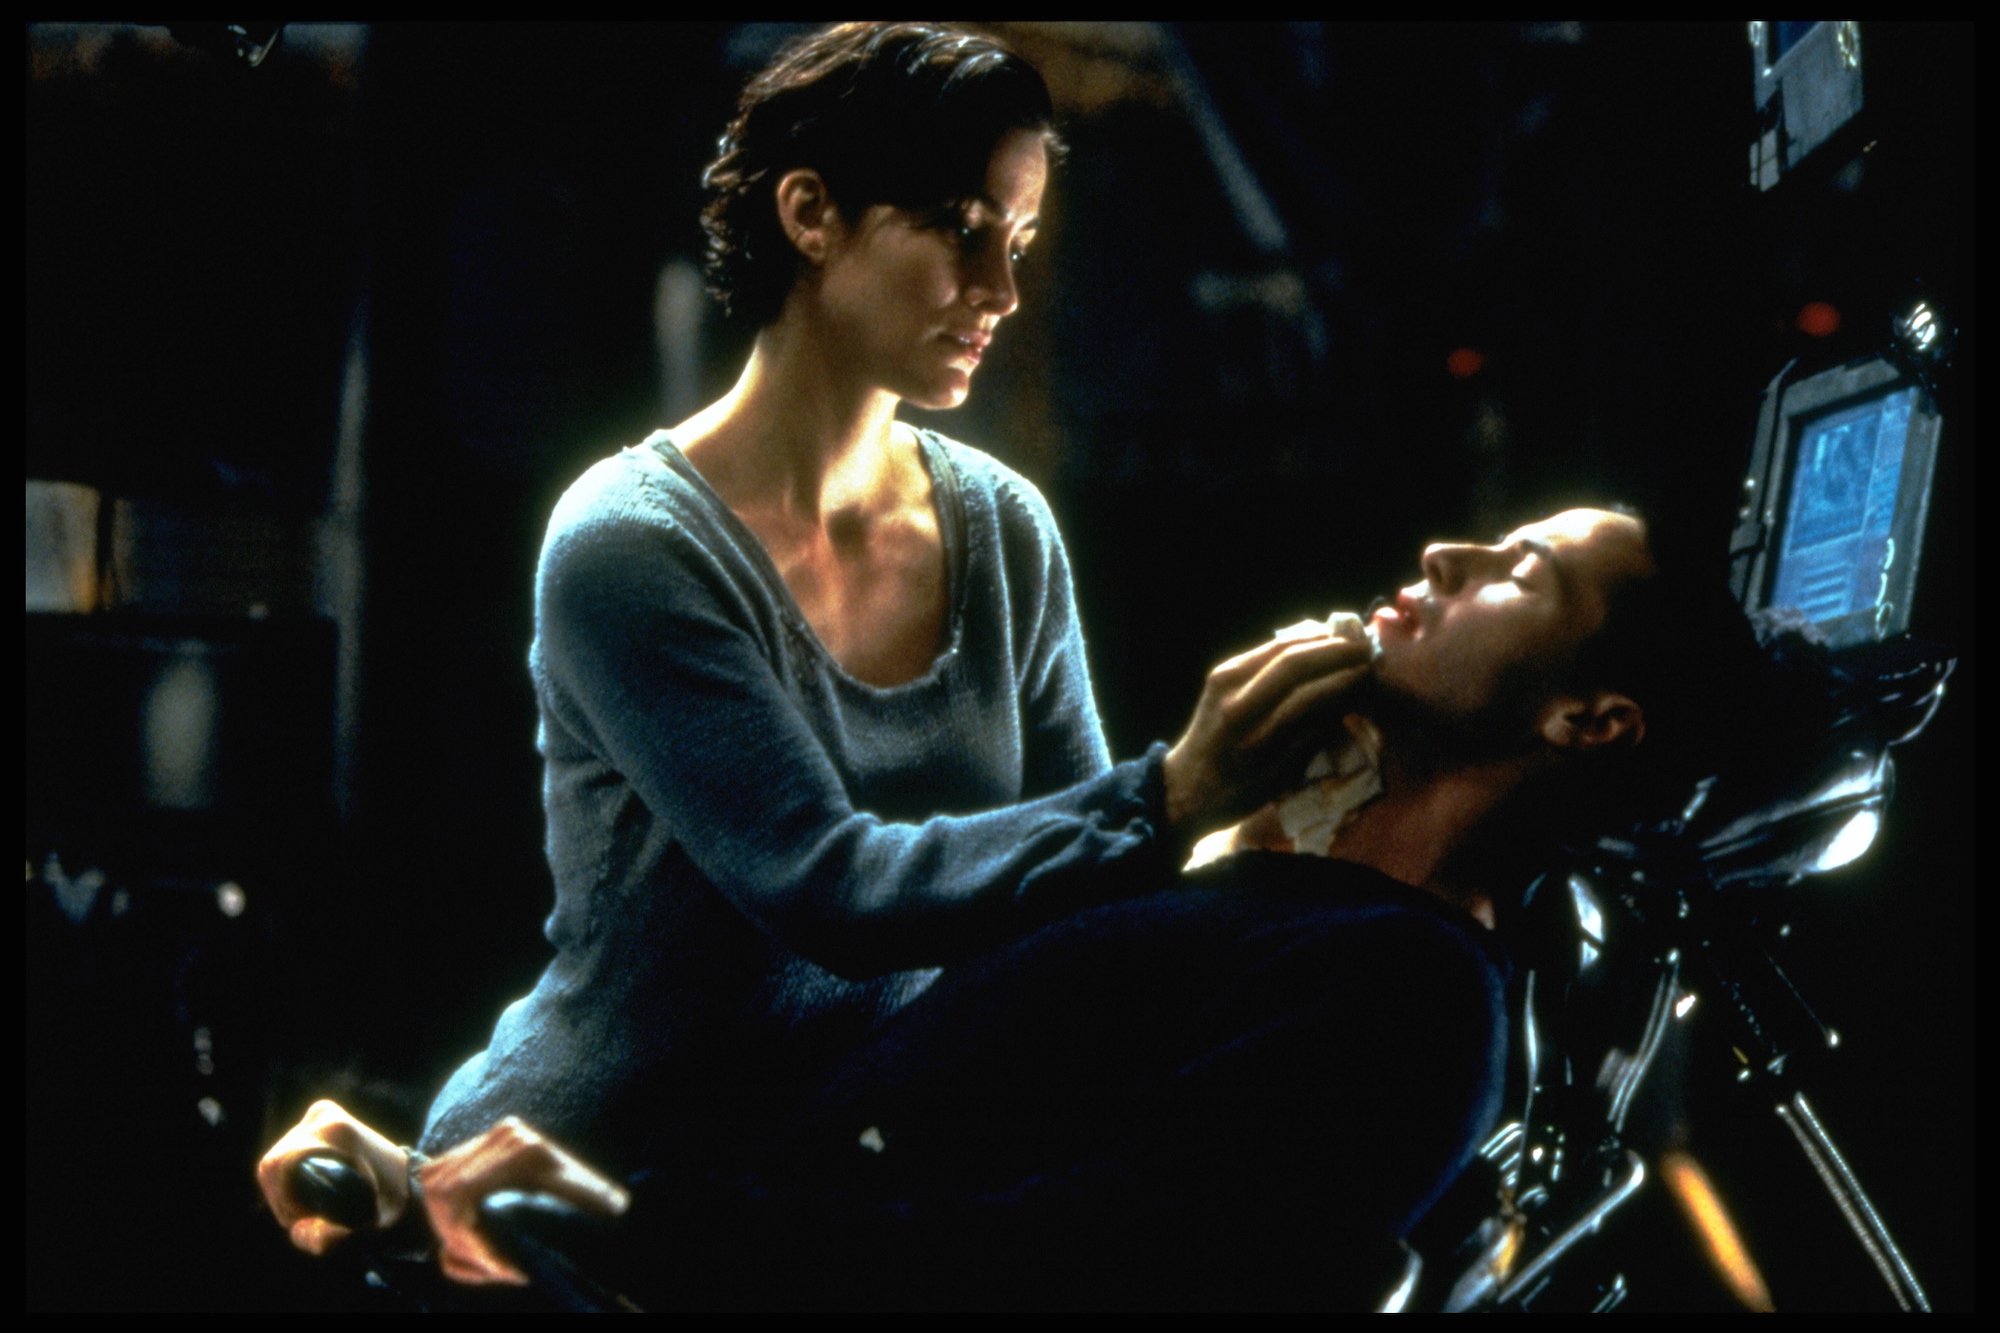 Keanu Reeves jacks into the matrix while Carrie-Anne Moss dabs his chin